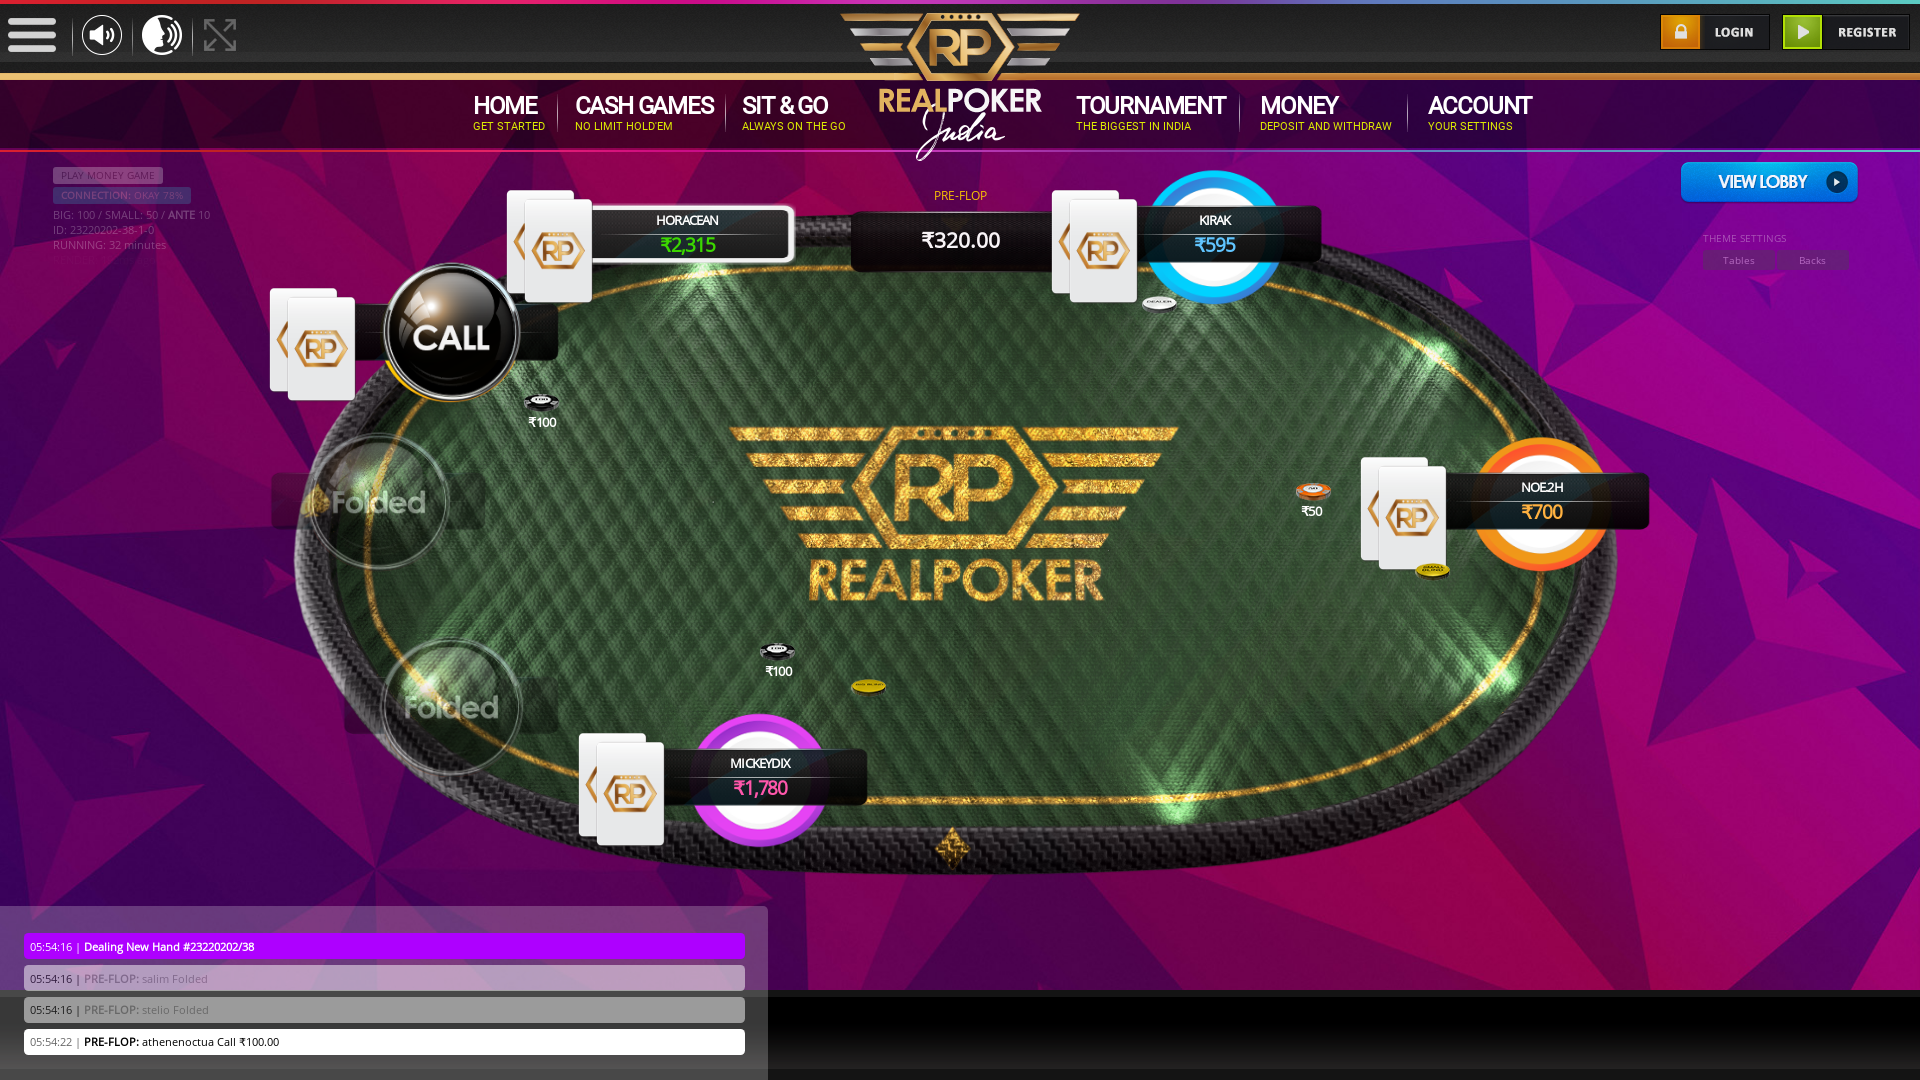 Real poker 10 player table in the 32nd minute of the match